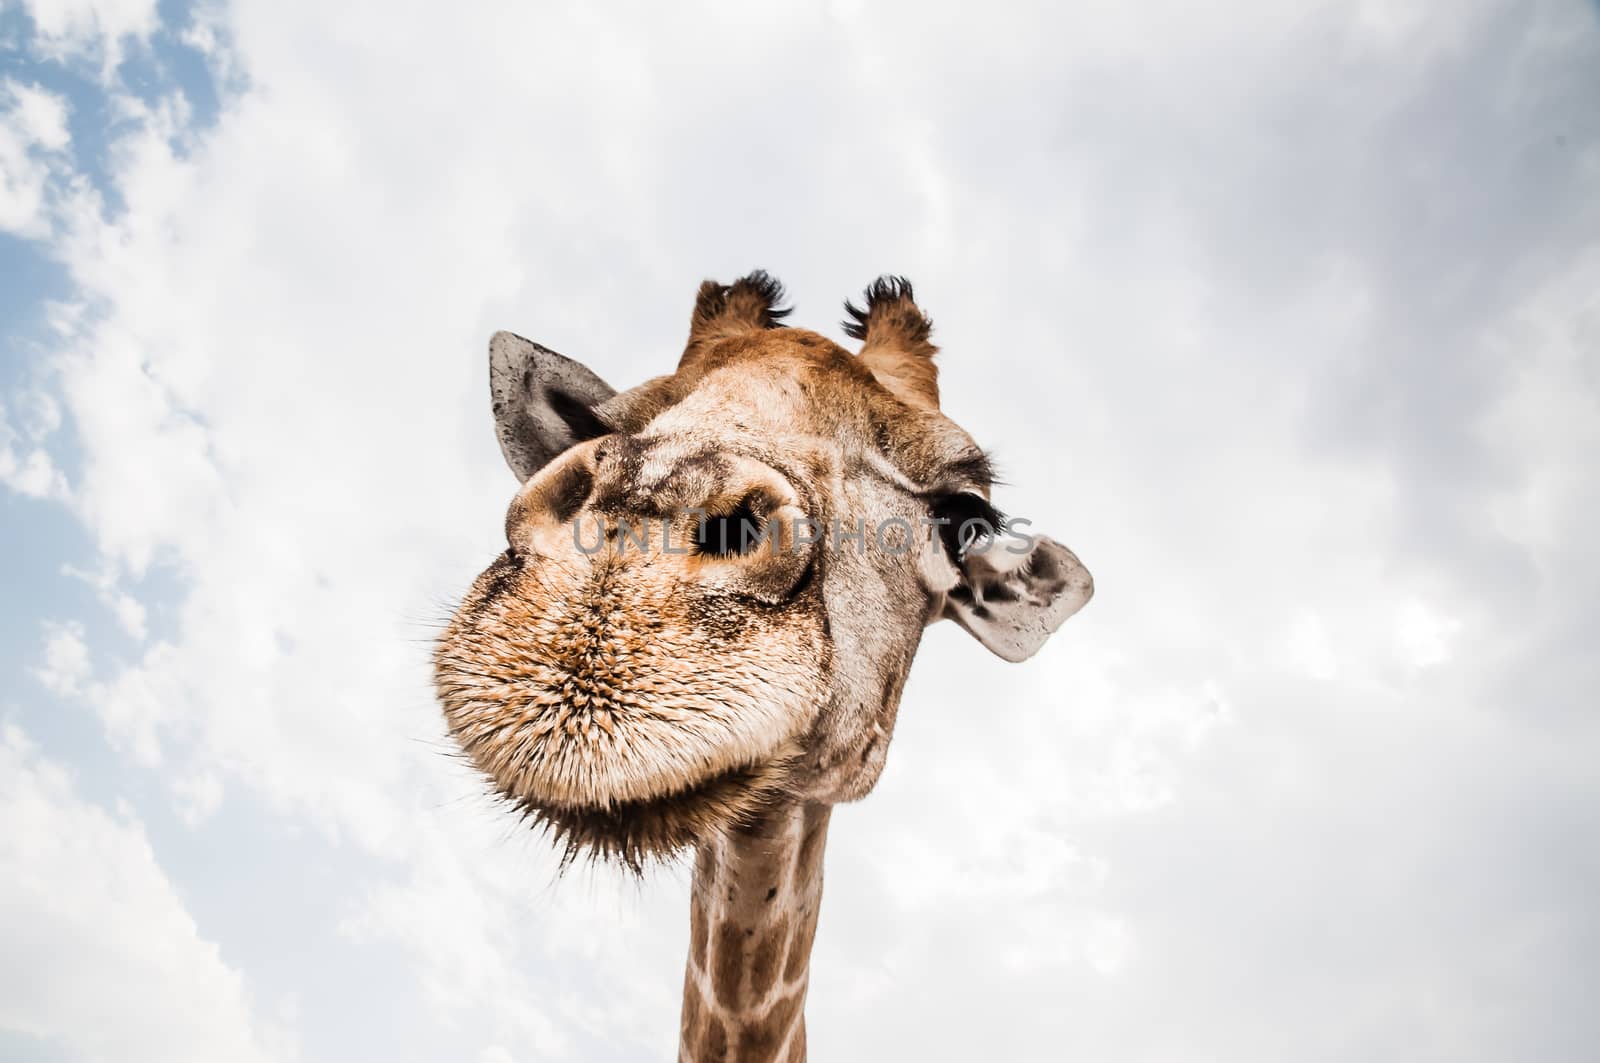 Close up photo of the neck and face of a giraffe.